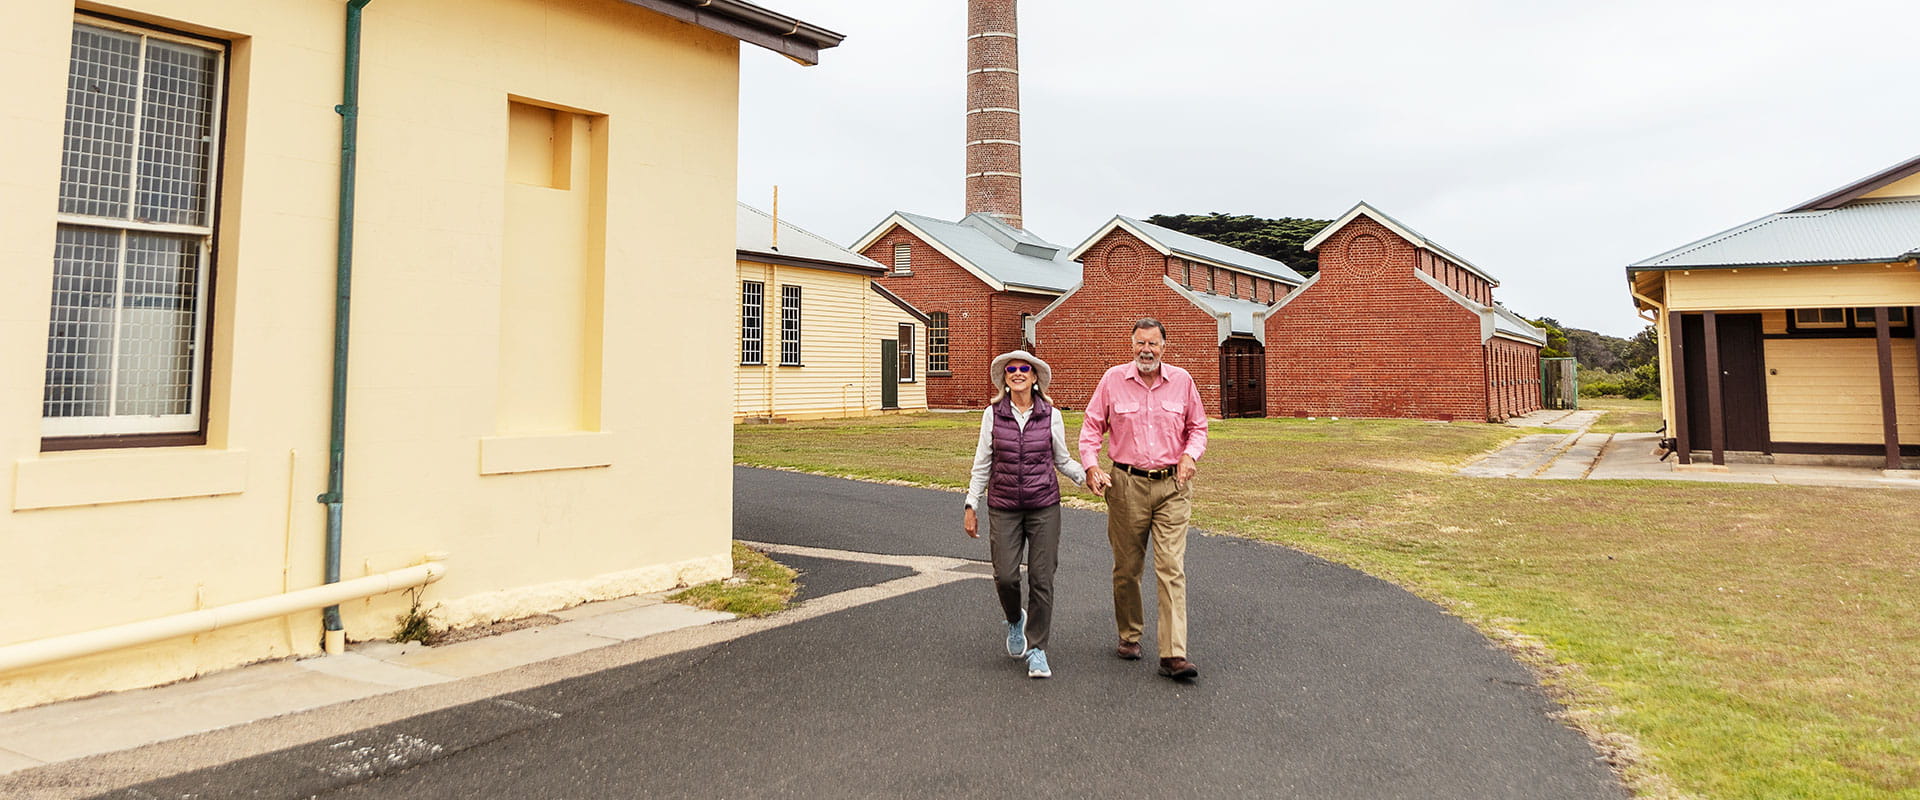 A hetrosexual couple walk hand-in-hand along a sealed path through historic brick buildings